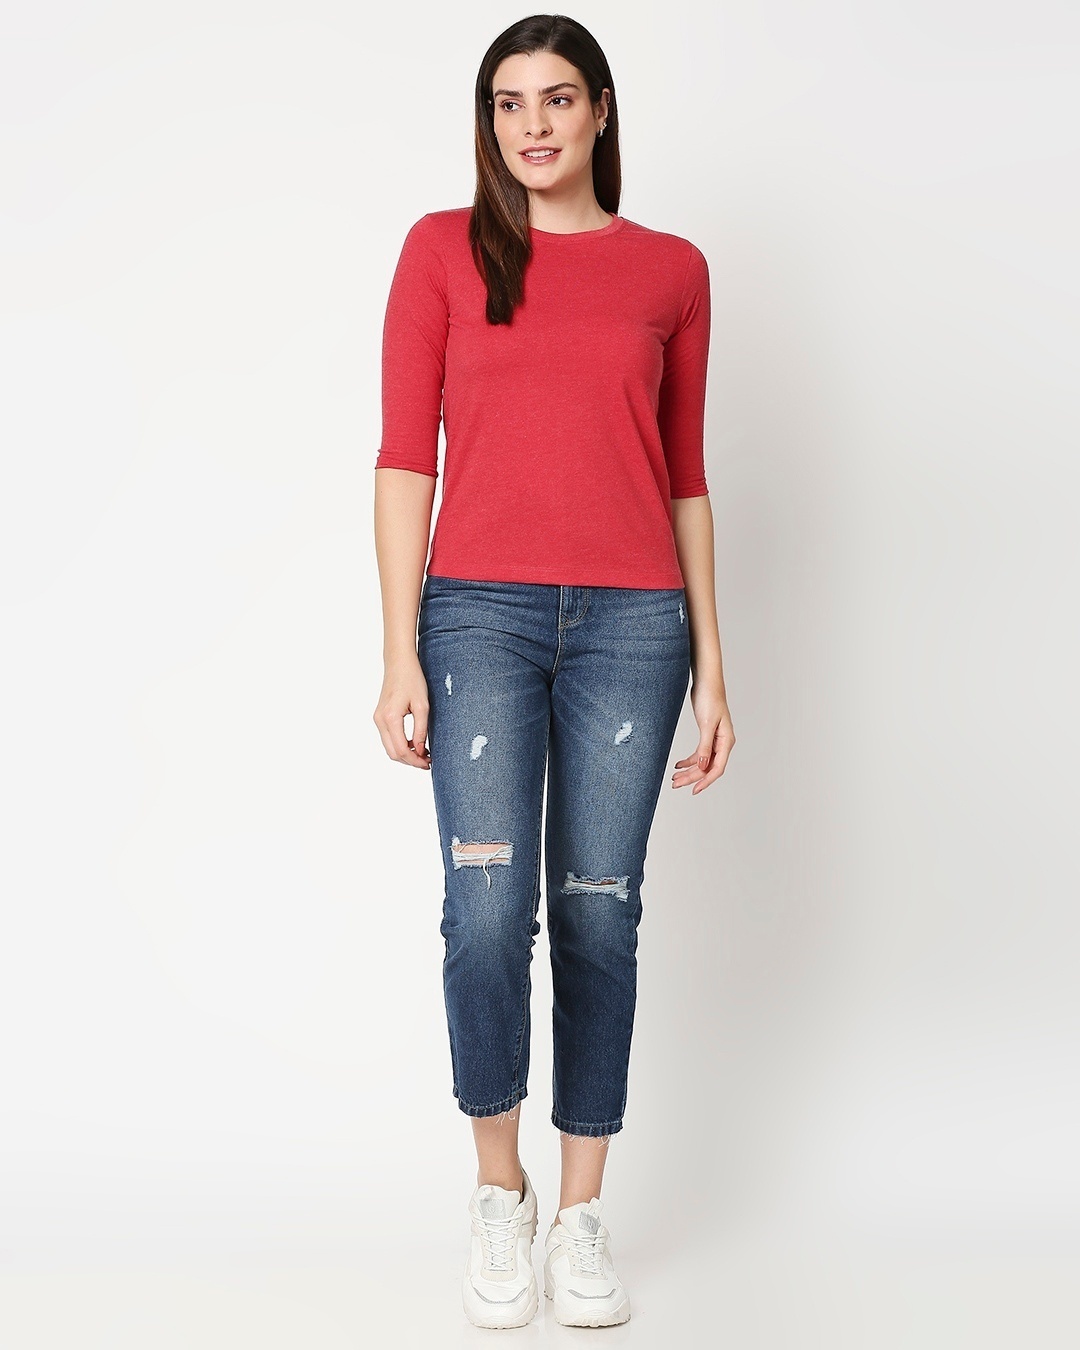 Shop Women's Red 3/4 Sleeve Slim Fit T-shirt